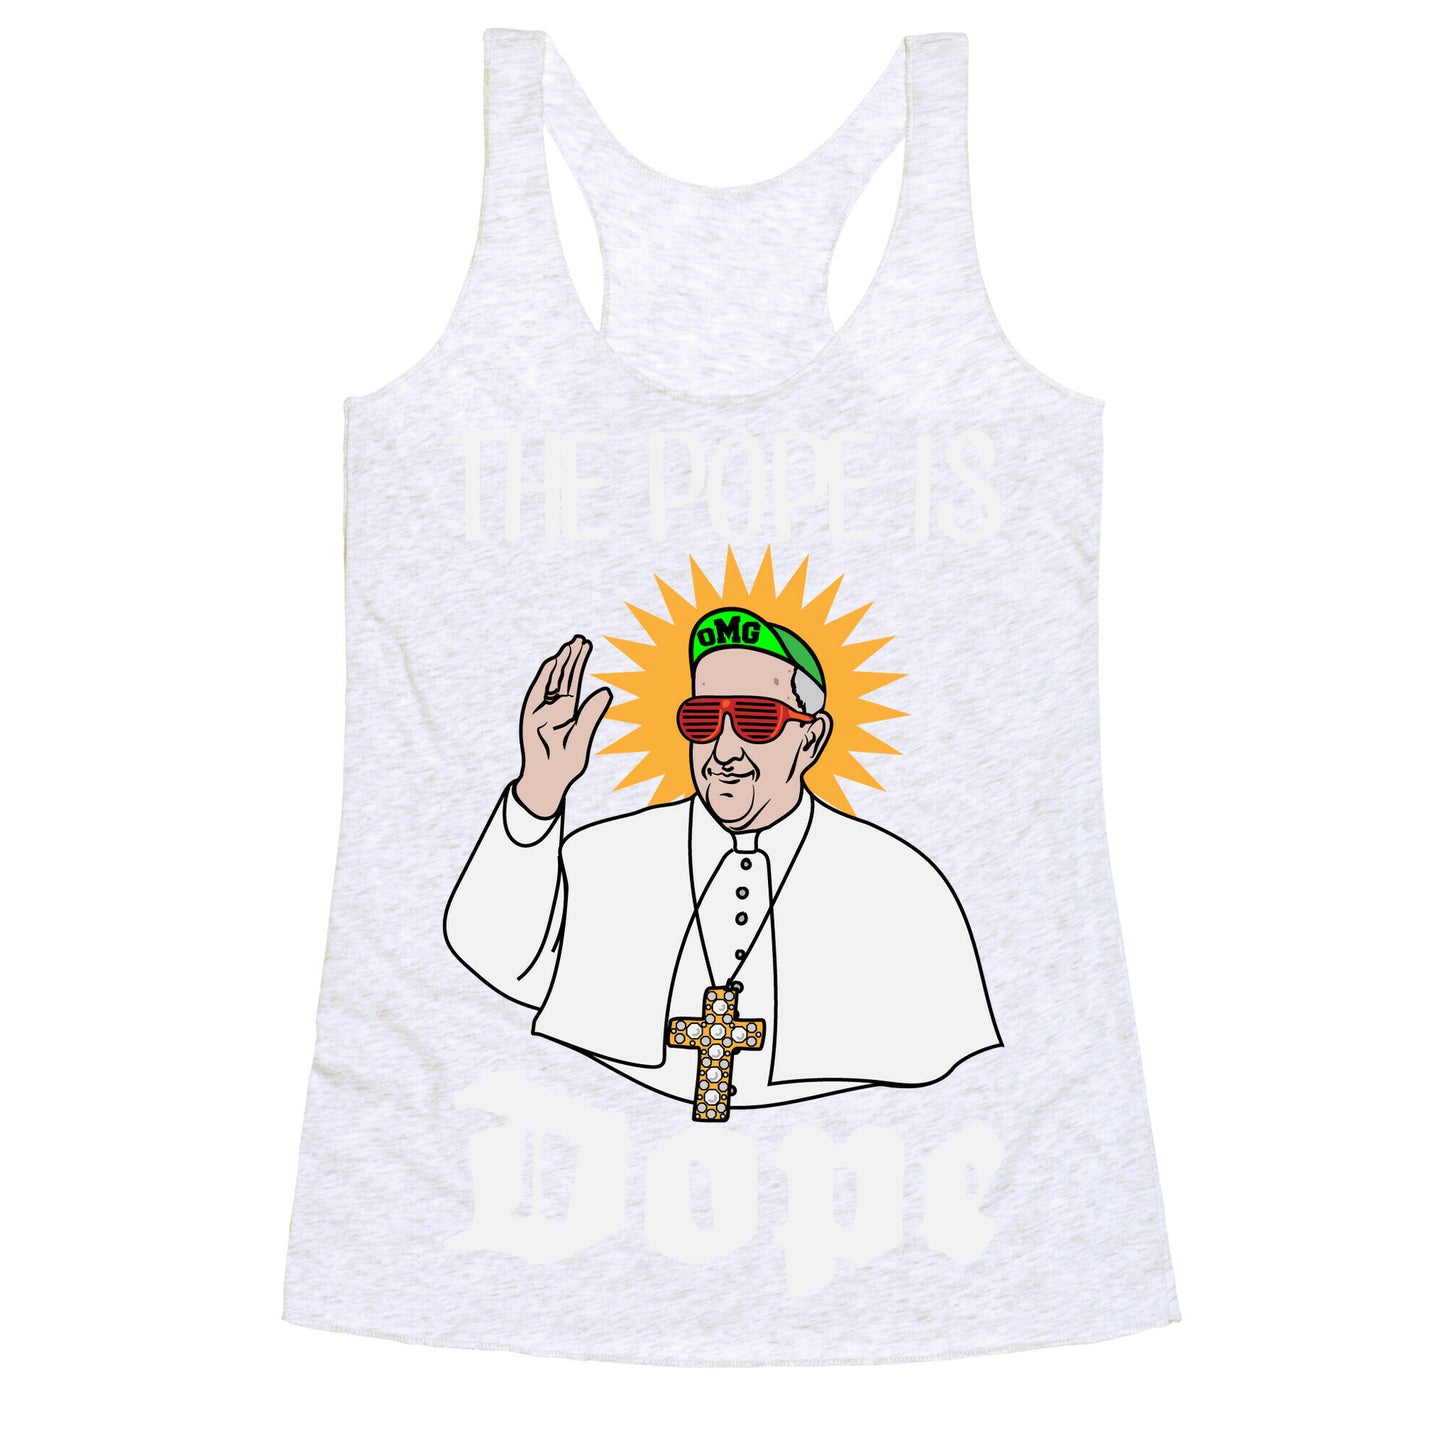 The Pope is Dope Racerback Tank